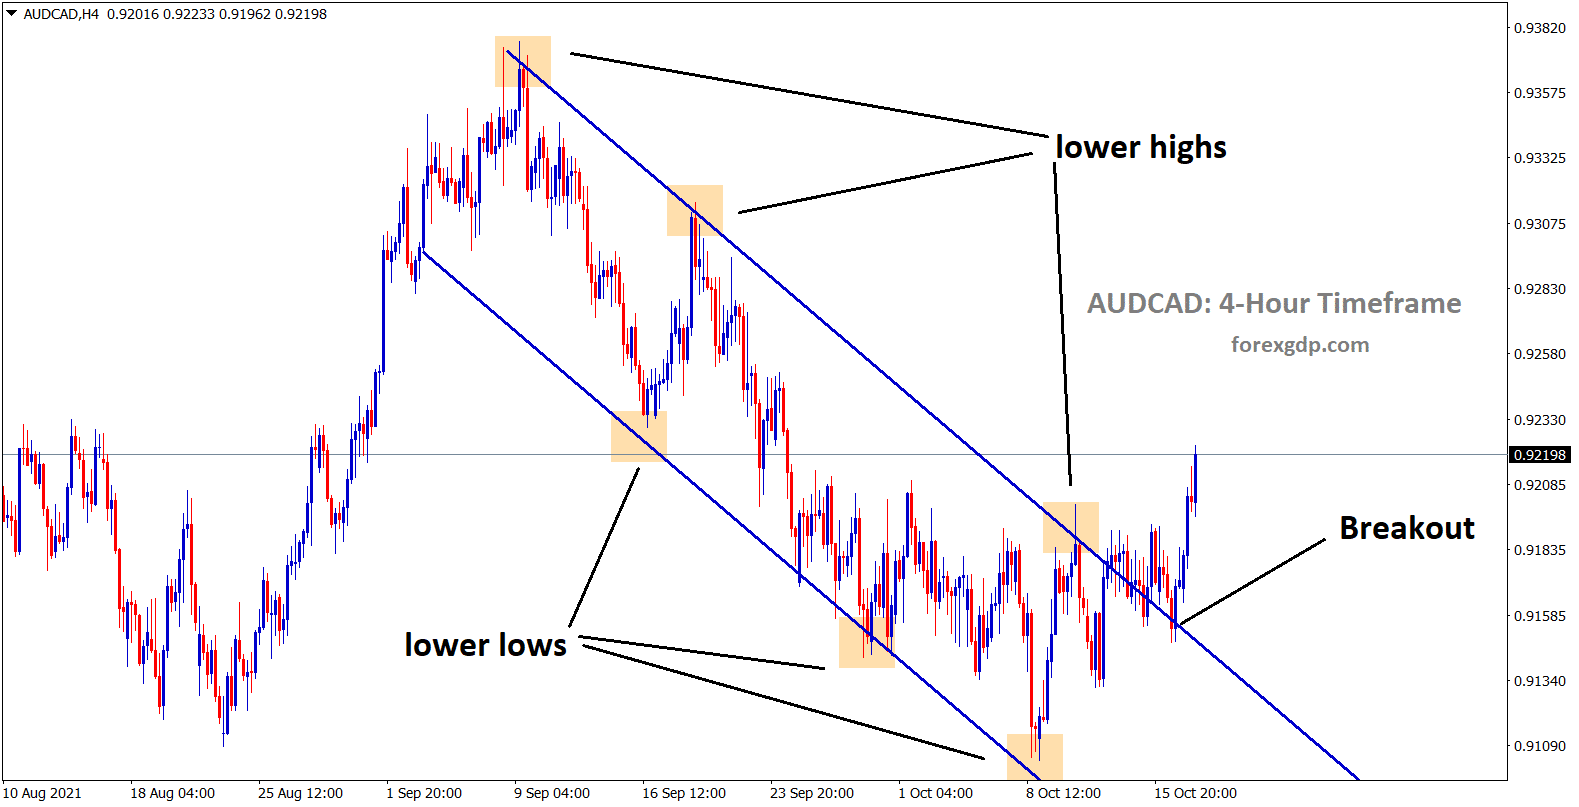 AUDCAD has broken the top of the descending channel in the 4 hour timeframe chart